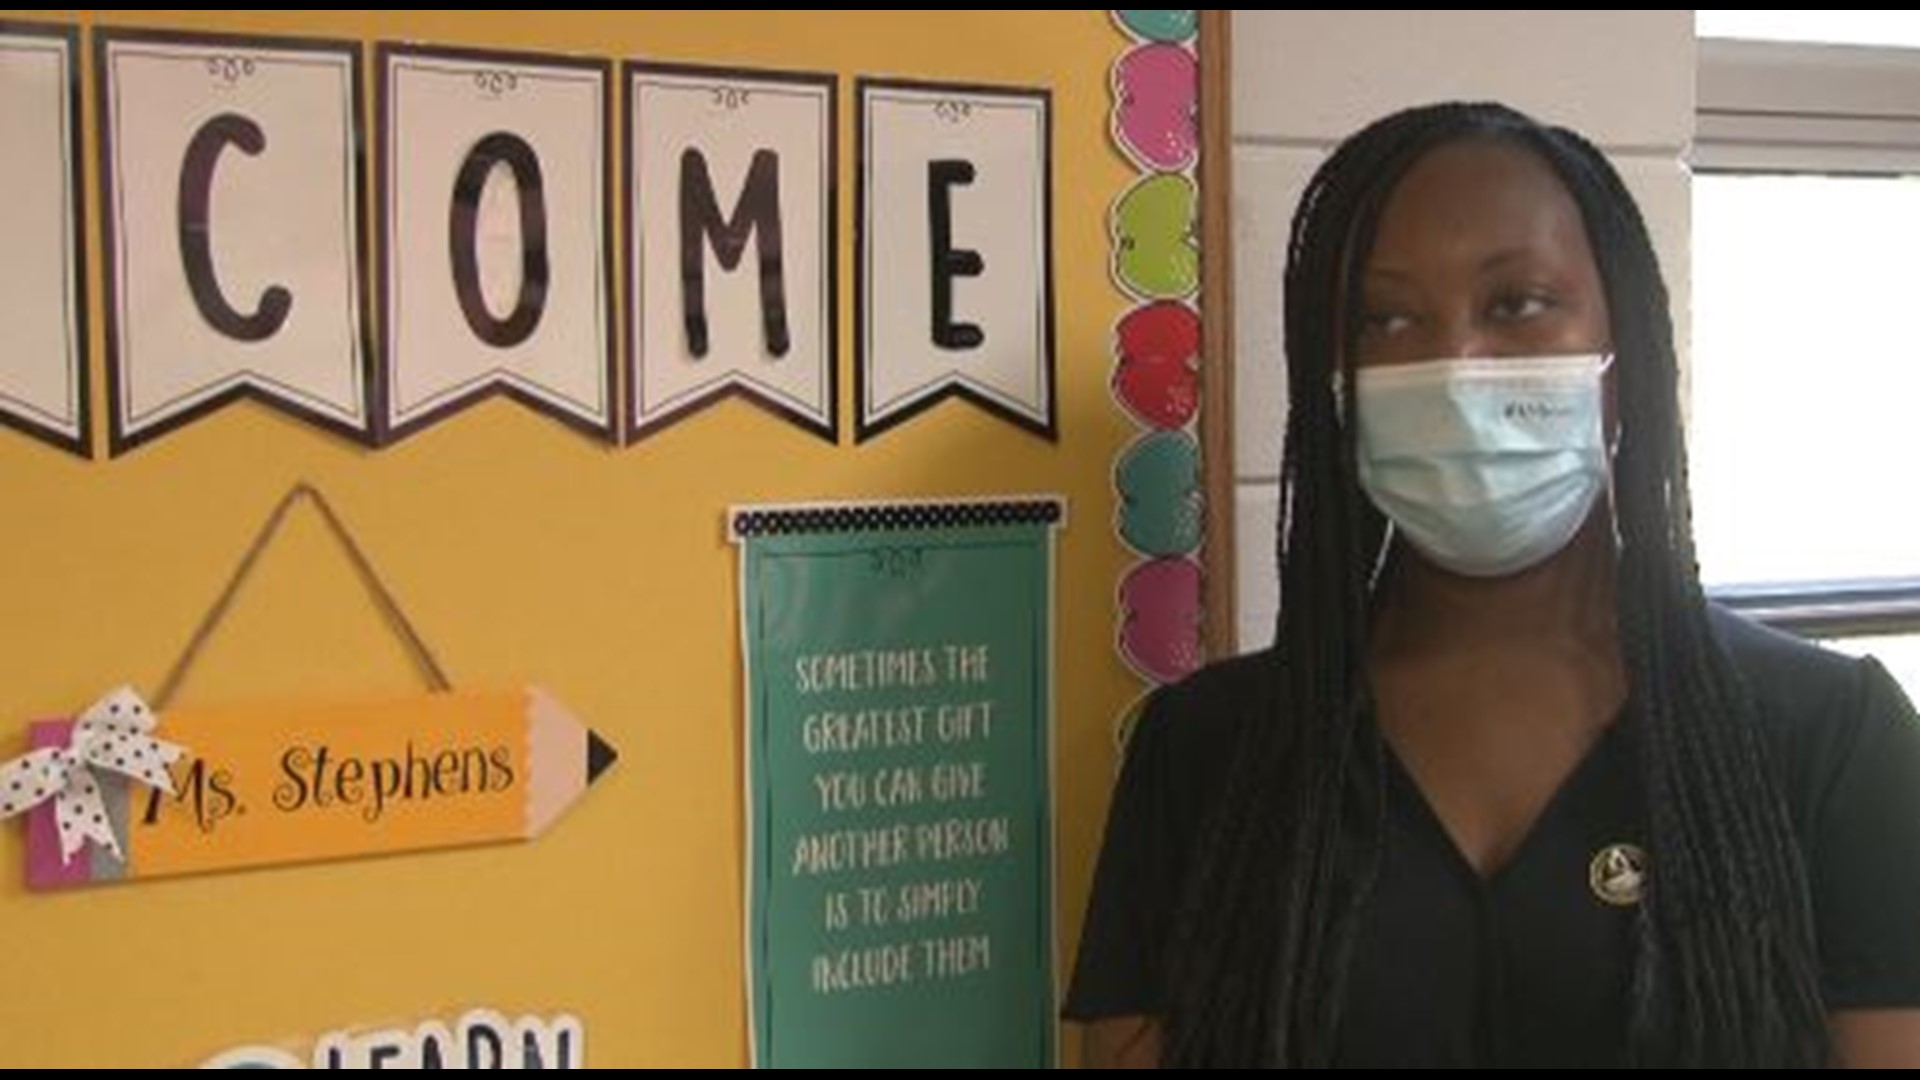 After finishing college in just three years, Marvesha Stephens returned to teach at the elementary school she attended